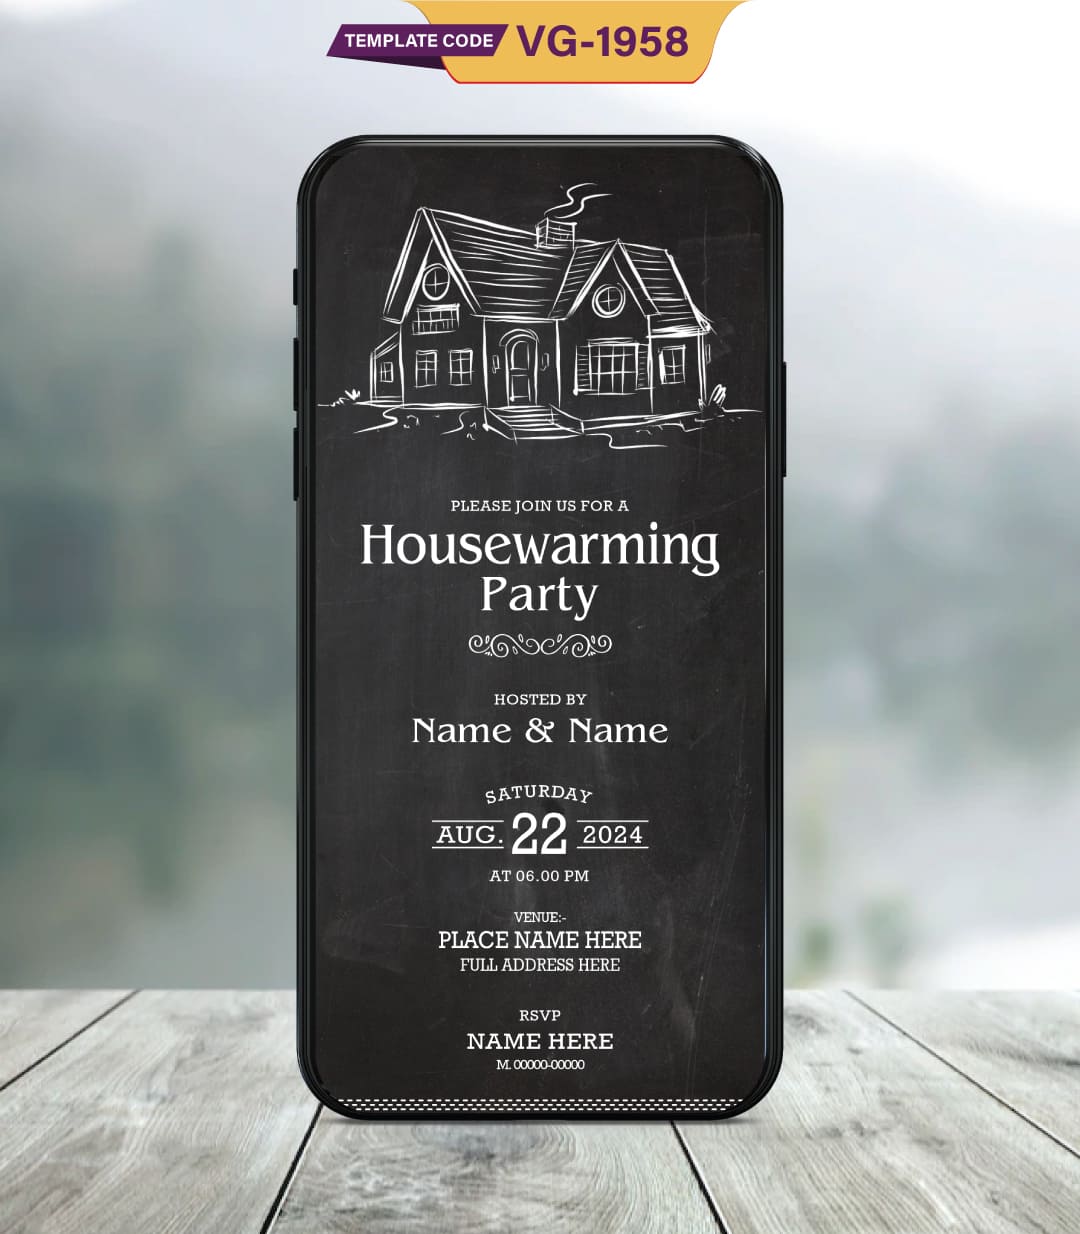 Online Housewarming Party Invitation Card